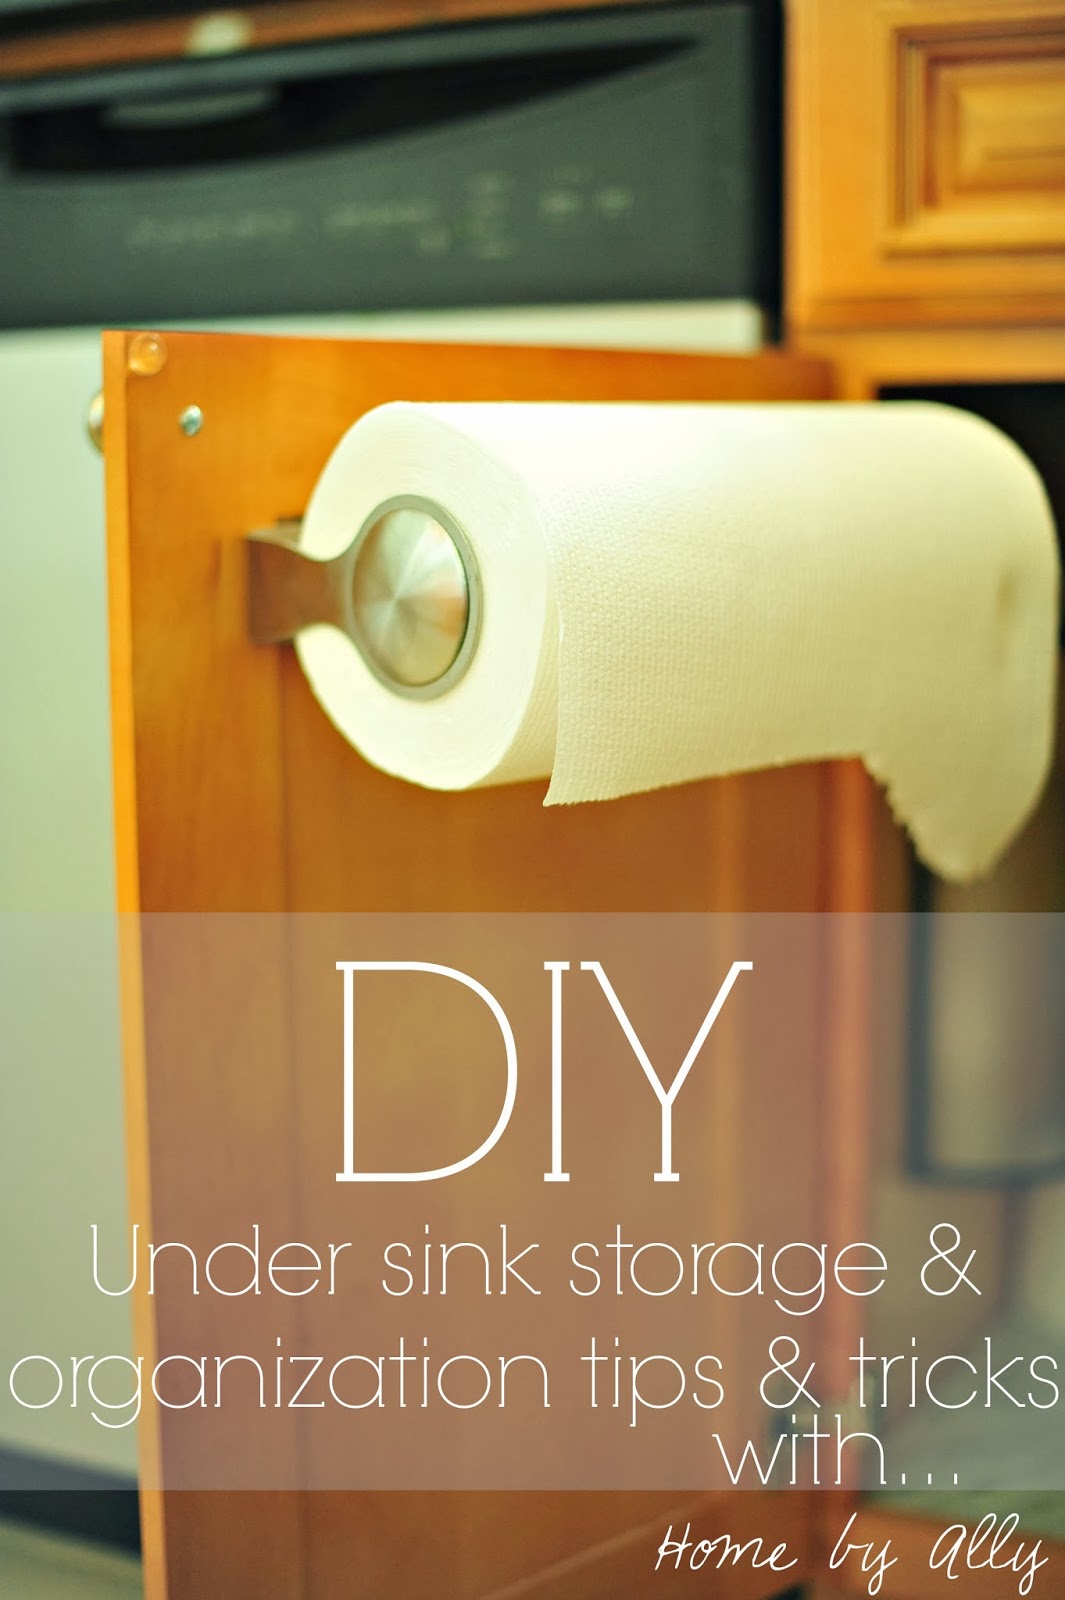 Home by Ally: DIY: Under sink tile and how to keep it clean